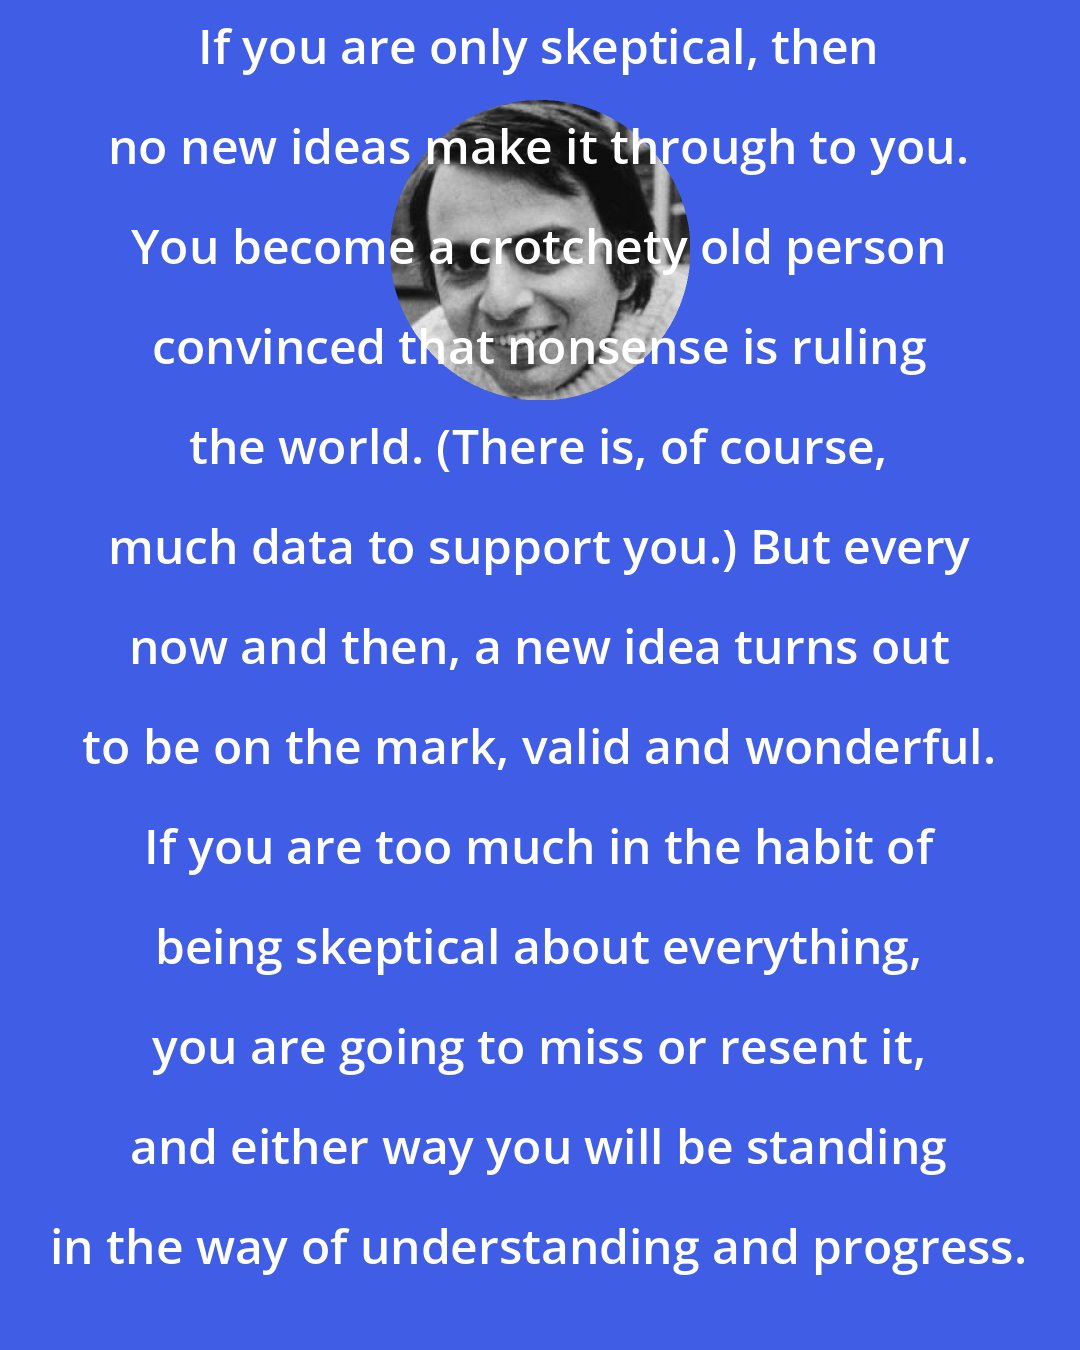 Carl Sagan: If you are only skeptical, then no new ideas make it through to you. You become a crotchety old person convinced that nonsense is ruling the world. (There is, of course, much data to support you.) But every now and then, a new idea turns out to be on the mark, valid and wonderful. If you are too much in the habit of being skeptical about everything, you are going to miss or resent it, and either way you will be standing in the way of understanding and progress.